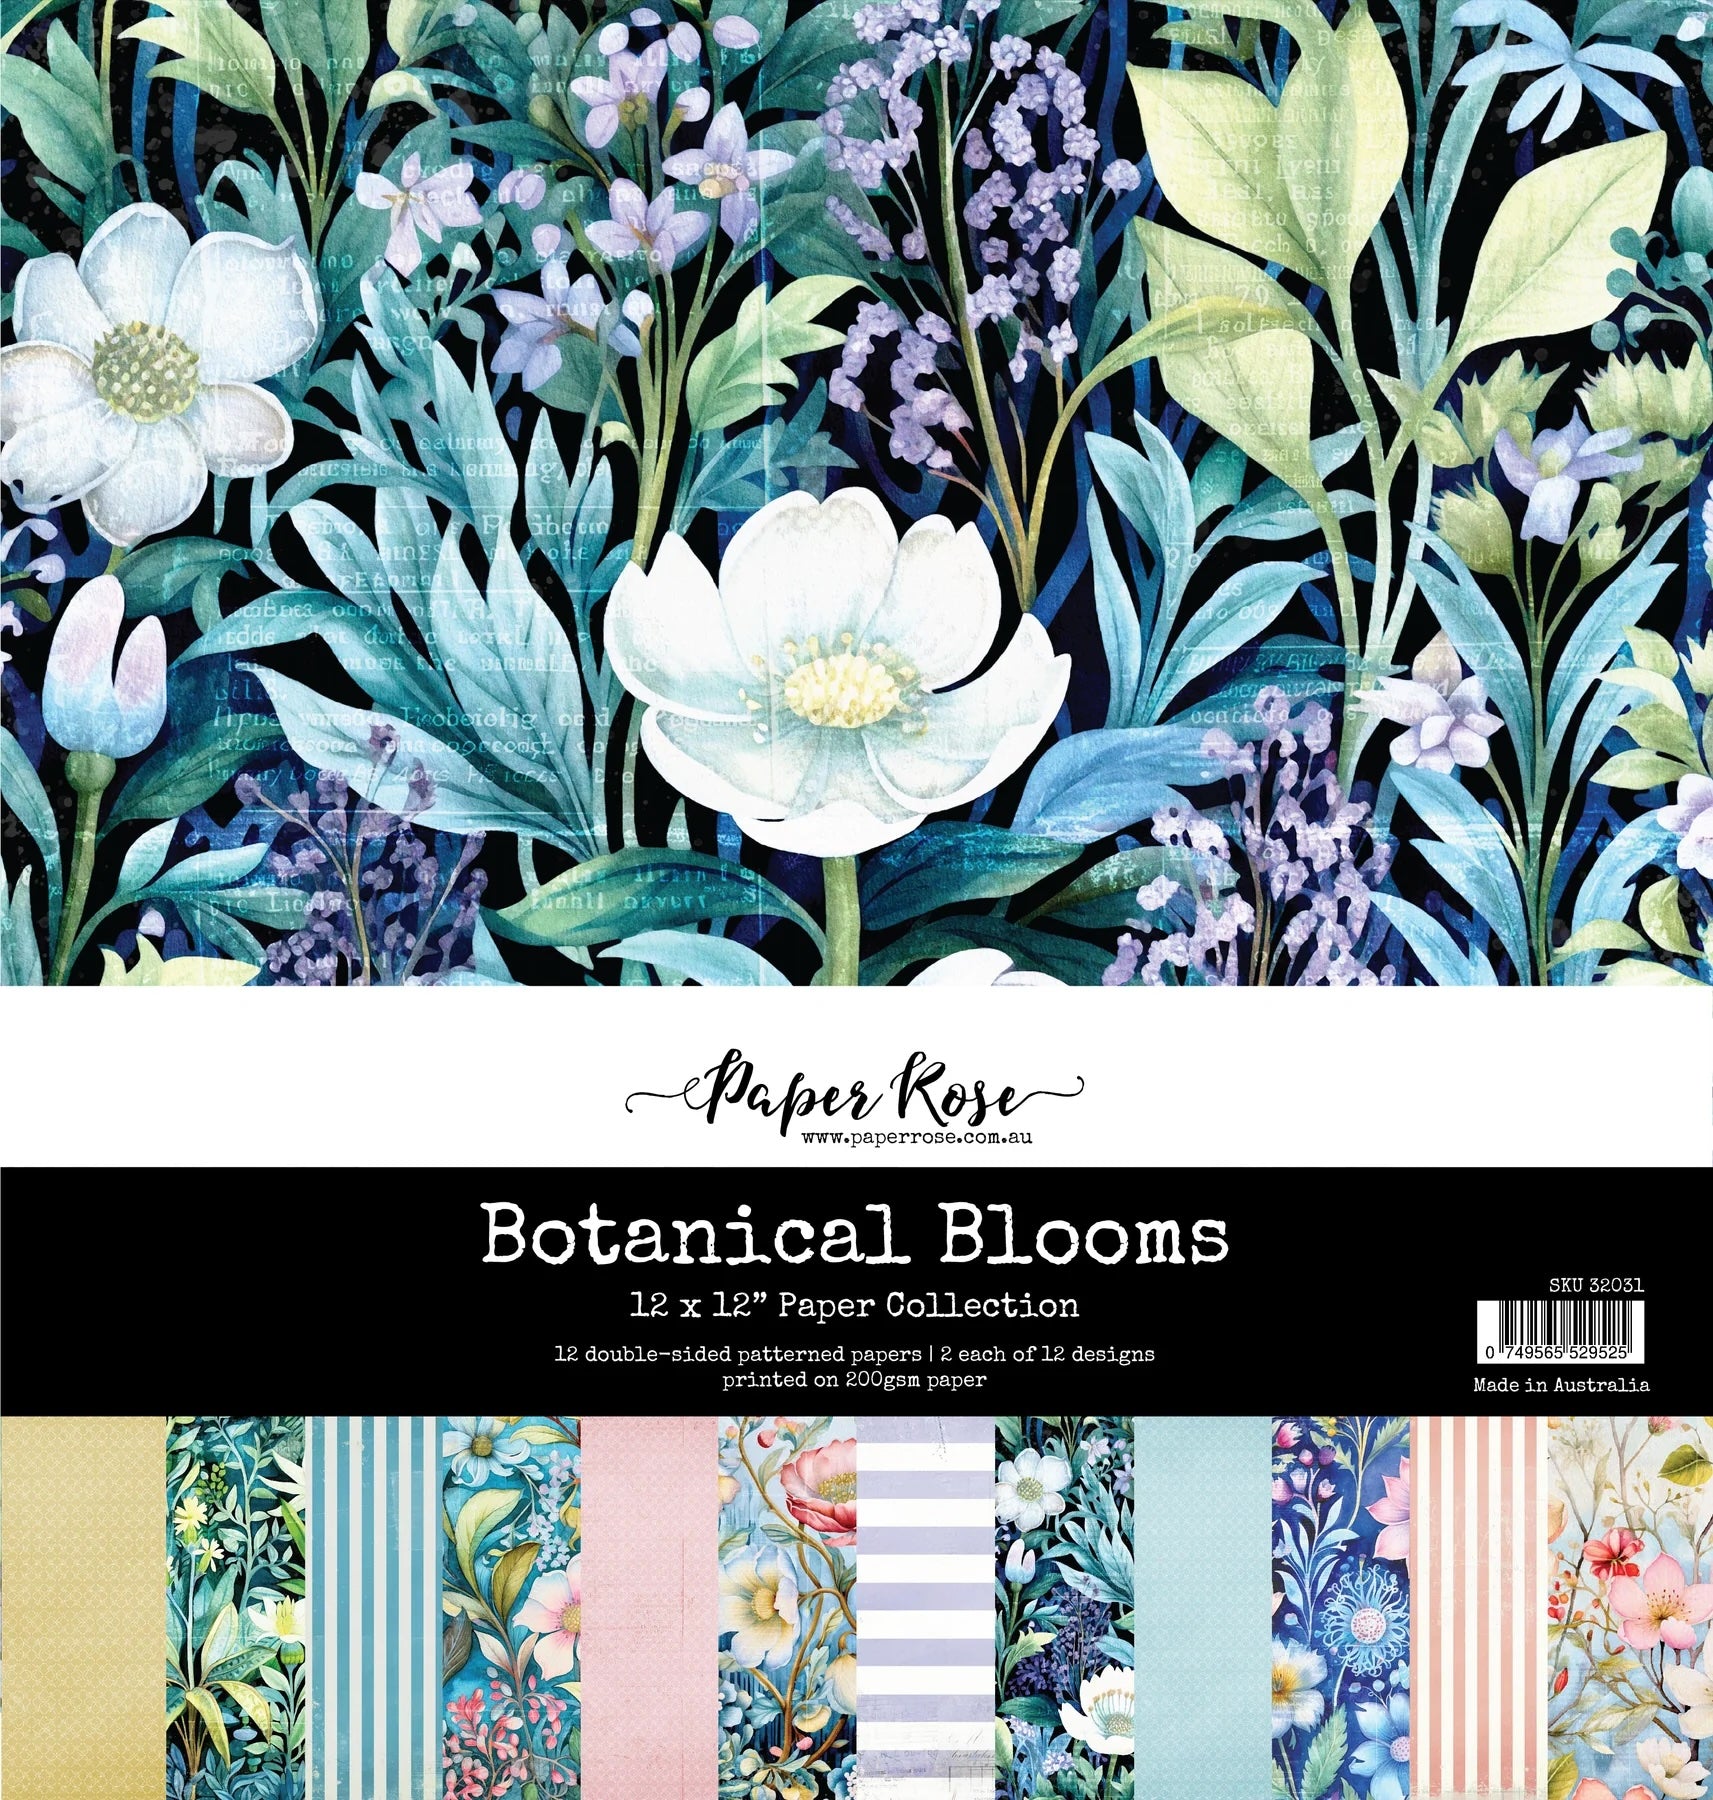 Botanical Blooms 12x12 Paper Collection 32031